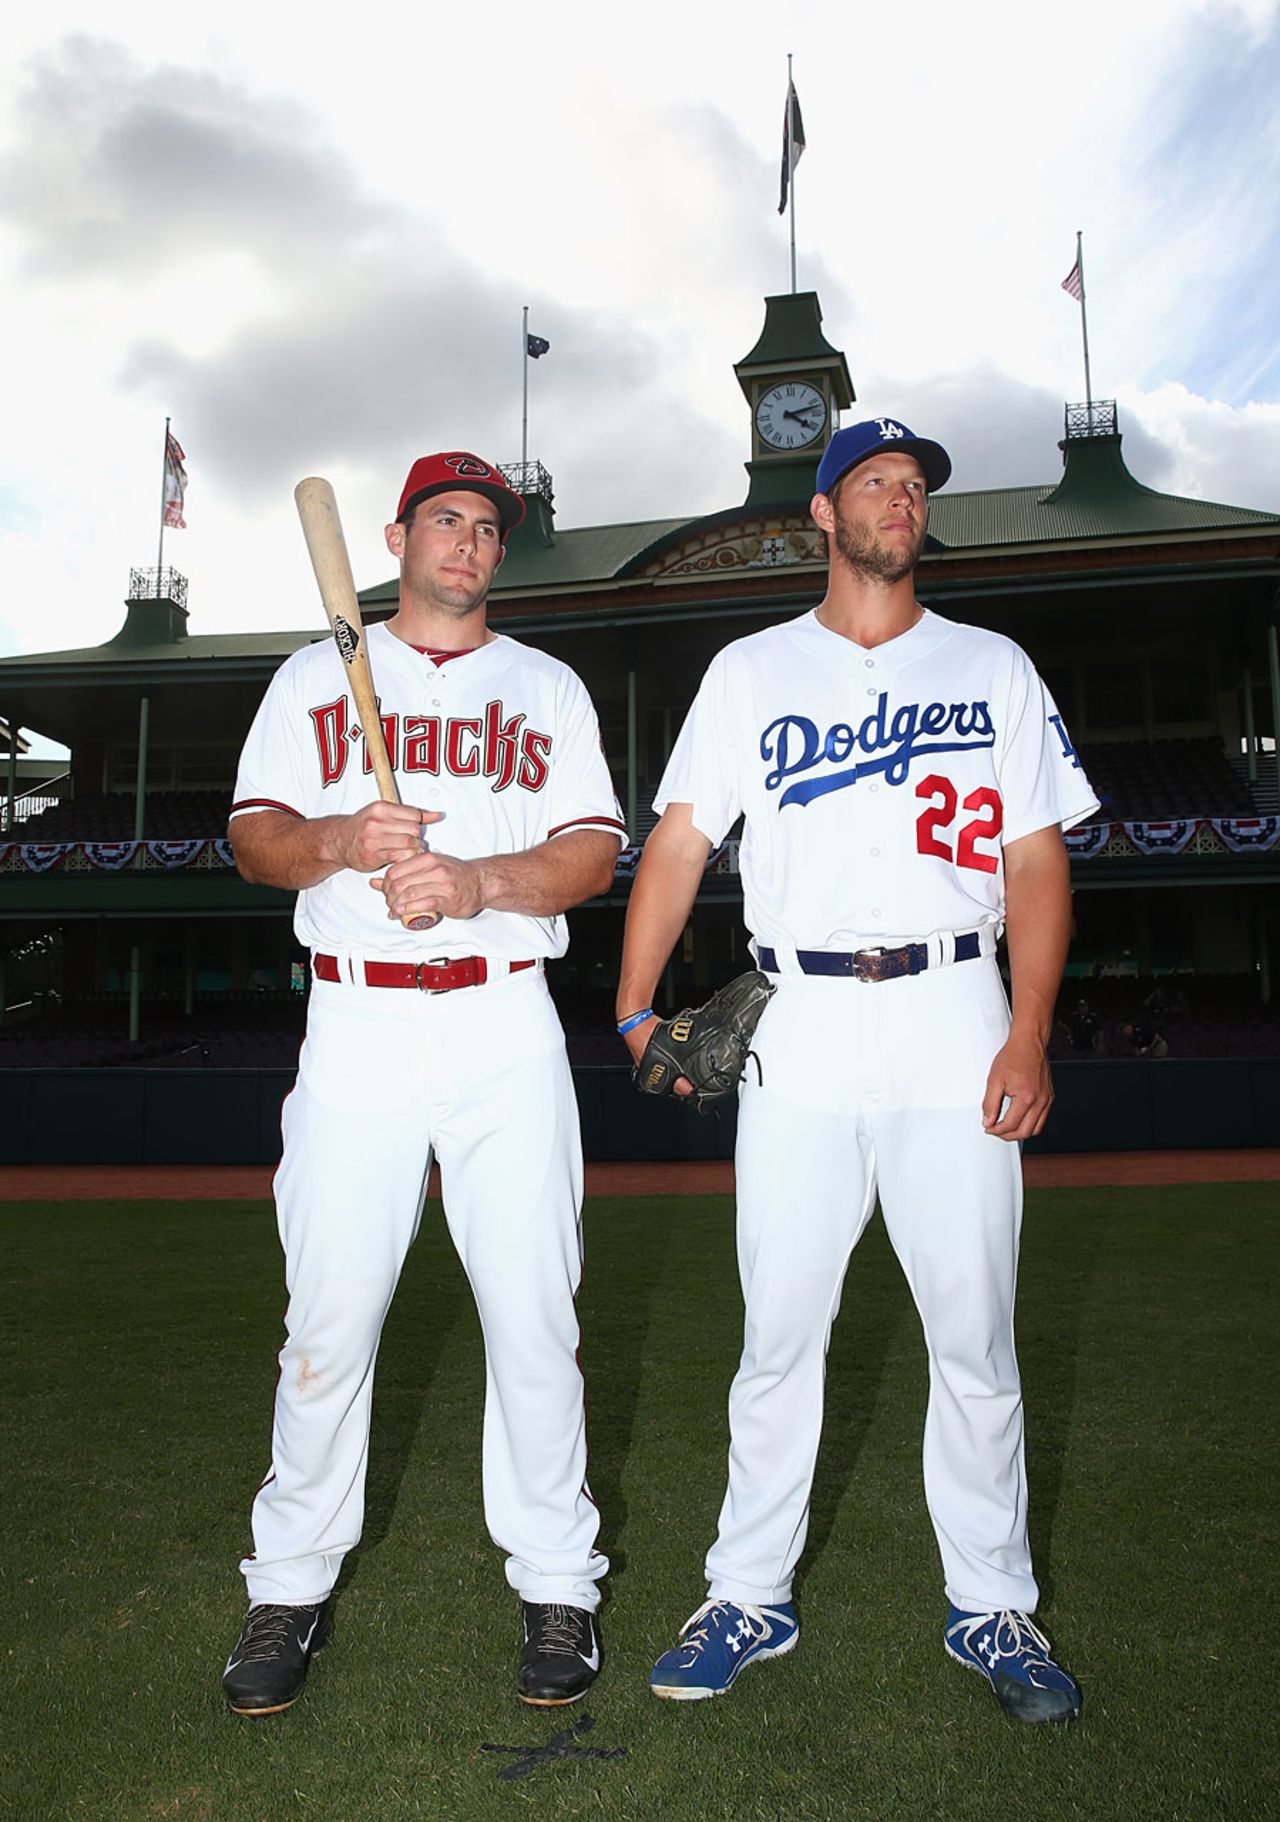 Paul Goldschmidt of the Arizona Diamondbacks and Clayton Kershaw of the Los Angeles Dodgers pose in front of the SCG pavilion, Sydney, March 19, 2014